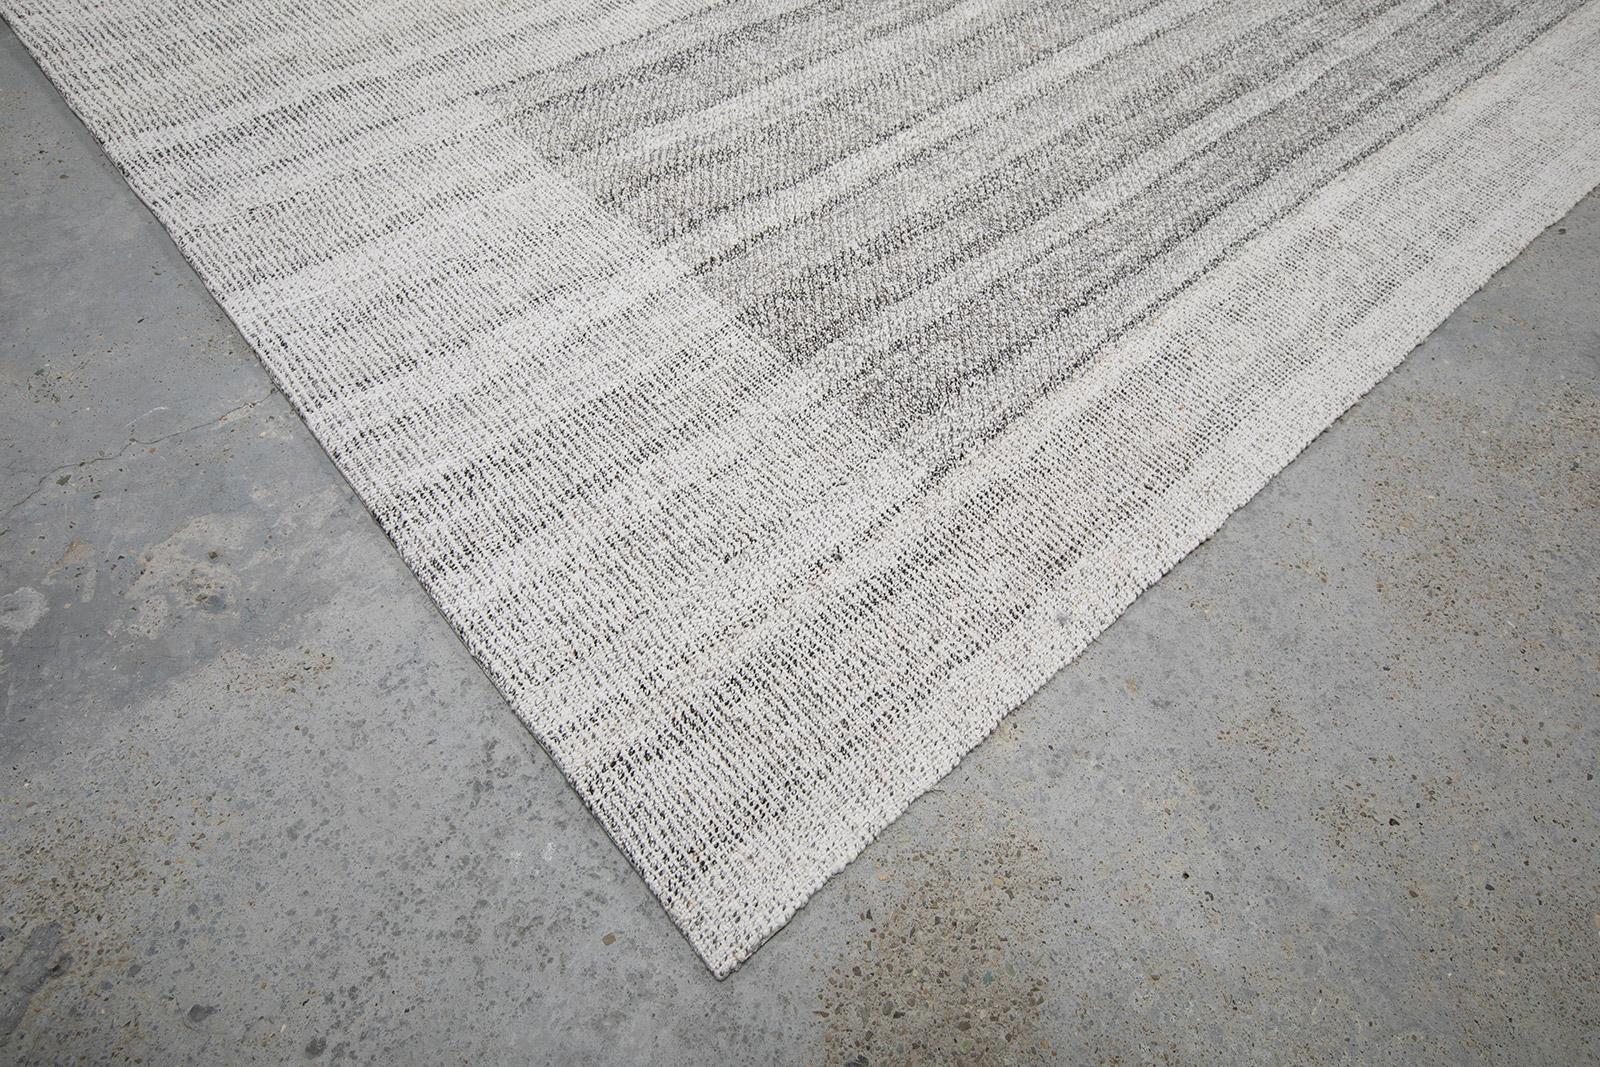 Hand-Woven Unique Modern Handwoven Flat-Weave Textured Rug in Shades of Grey For Sale